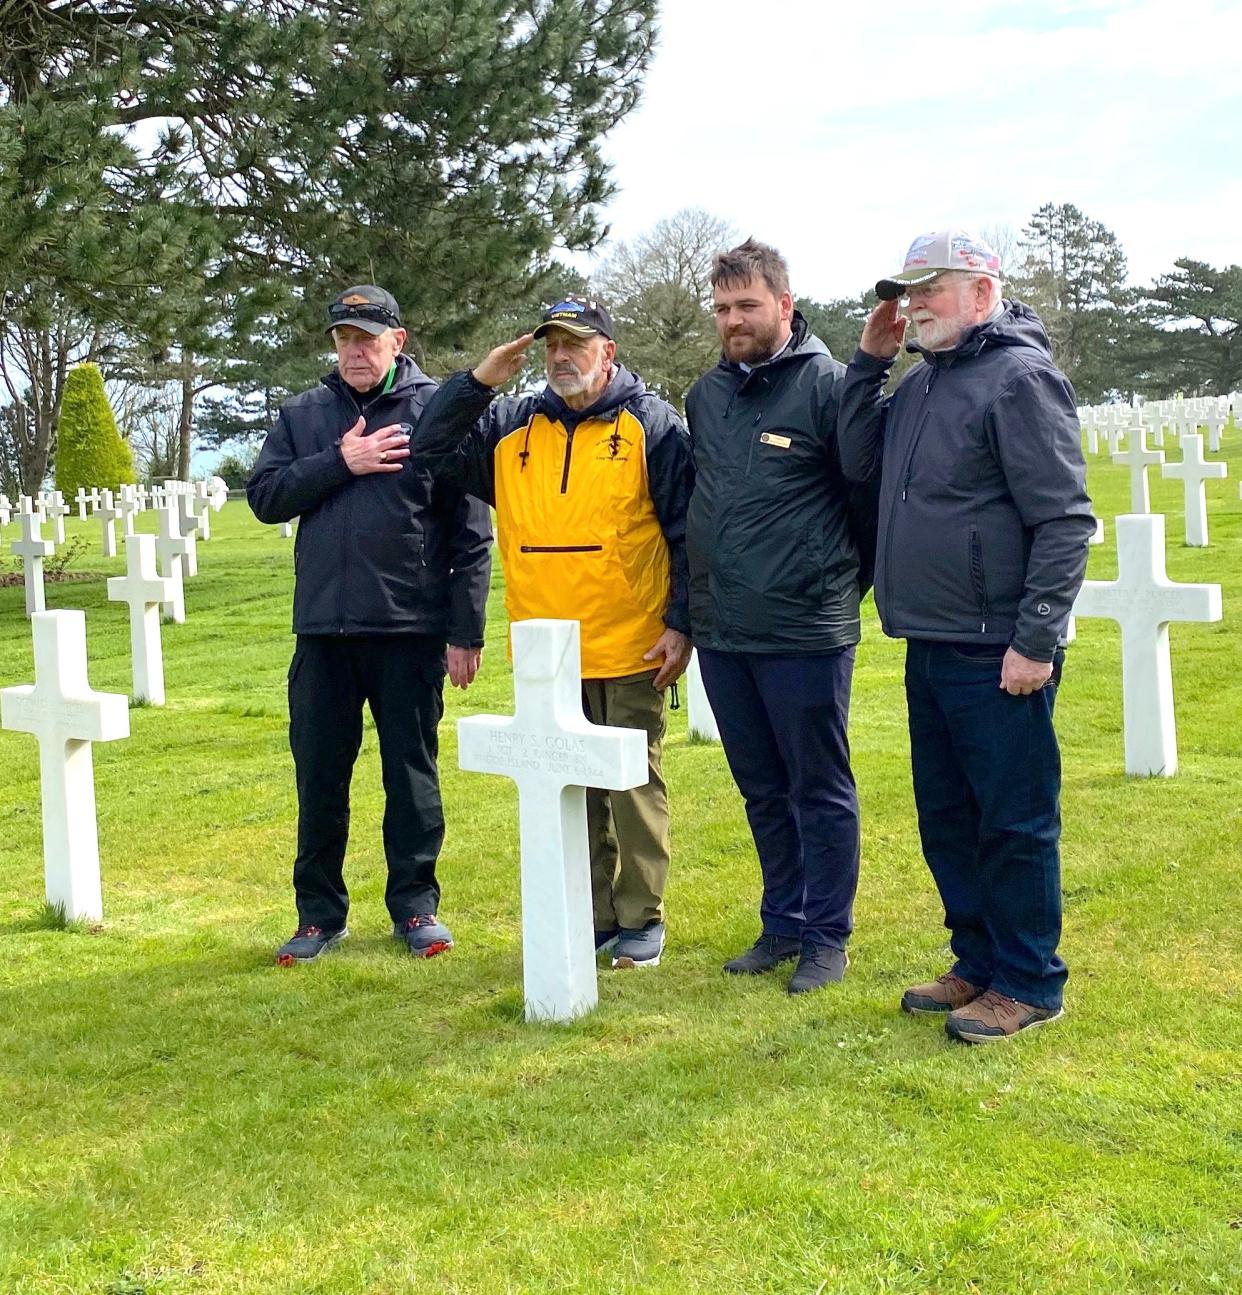 Paying respects at the Normandy American Cemetery are, from right, Bill Sheridan, Paul Johnson, Bert Guarnieri and a French guide.